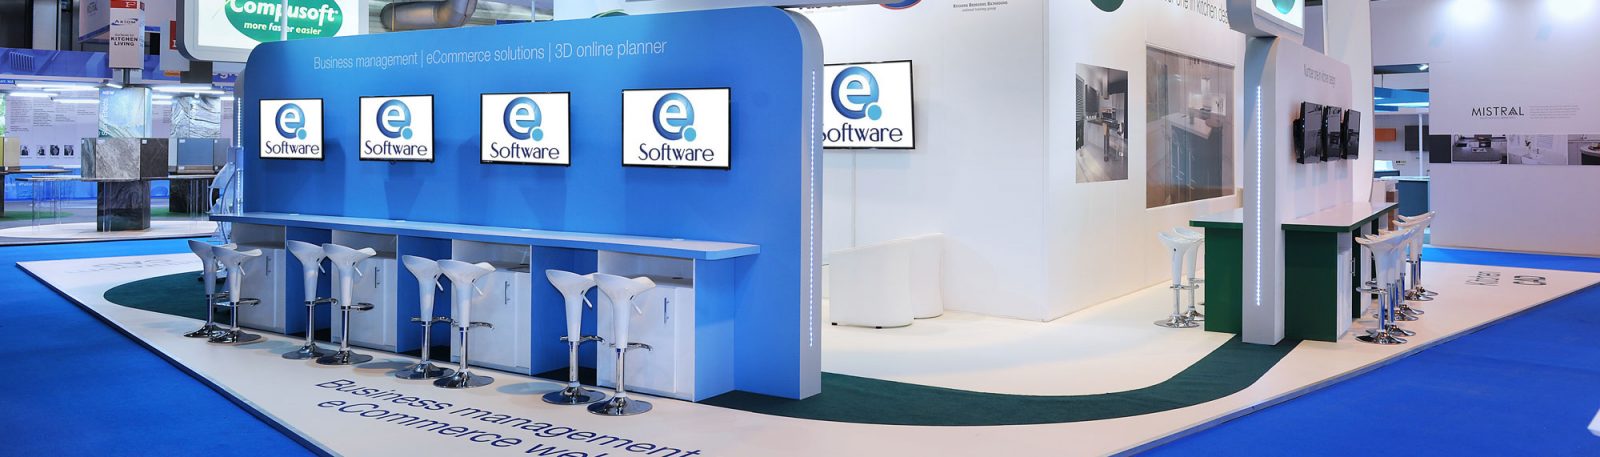 Exhibition Stand Furniture hire